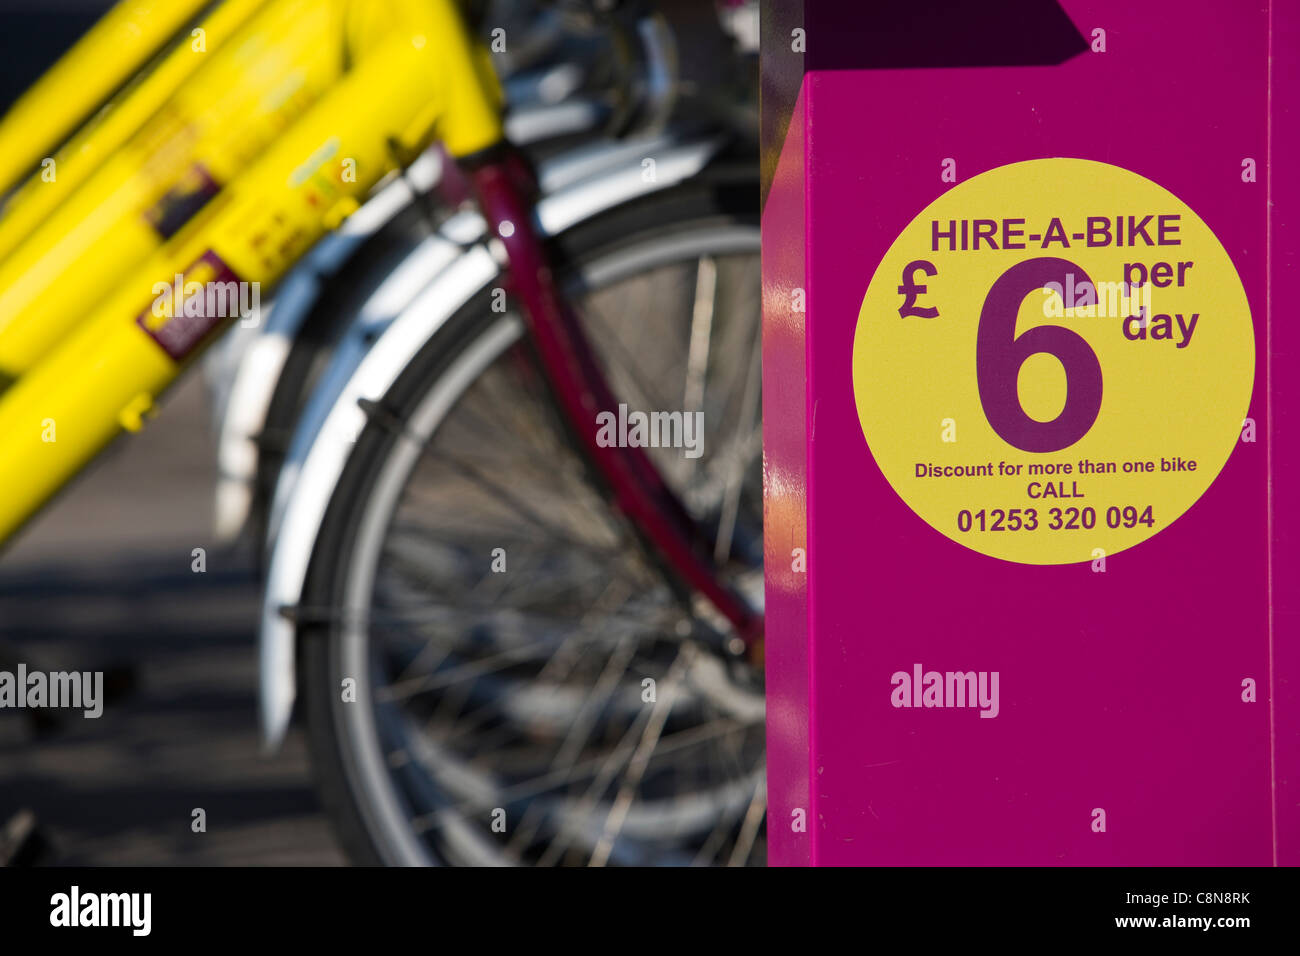 Hire a bike, only six pounds per day in Blackpool, UK Stock Photo